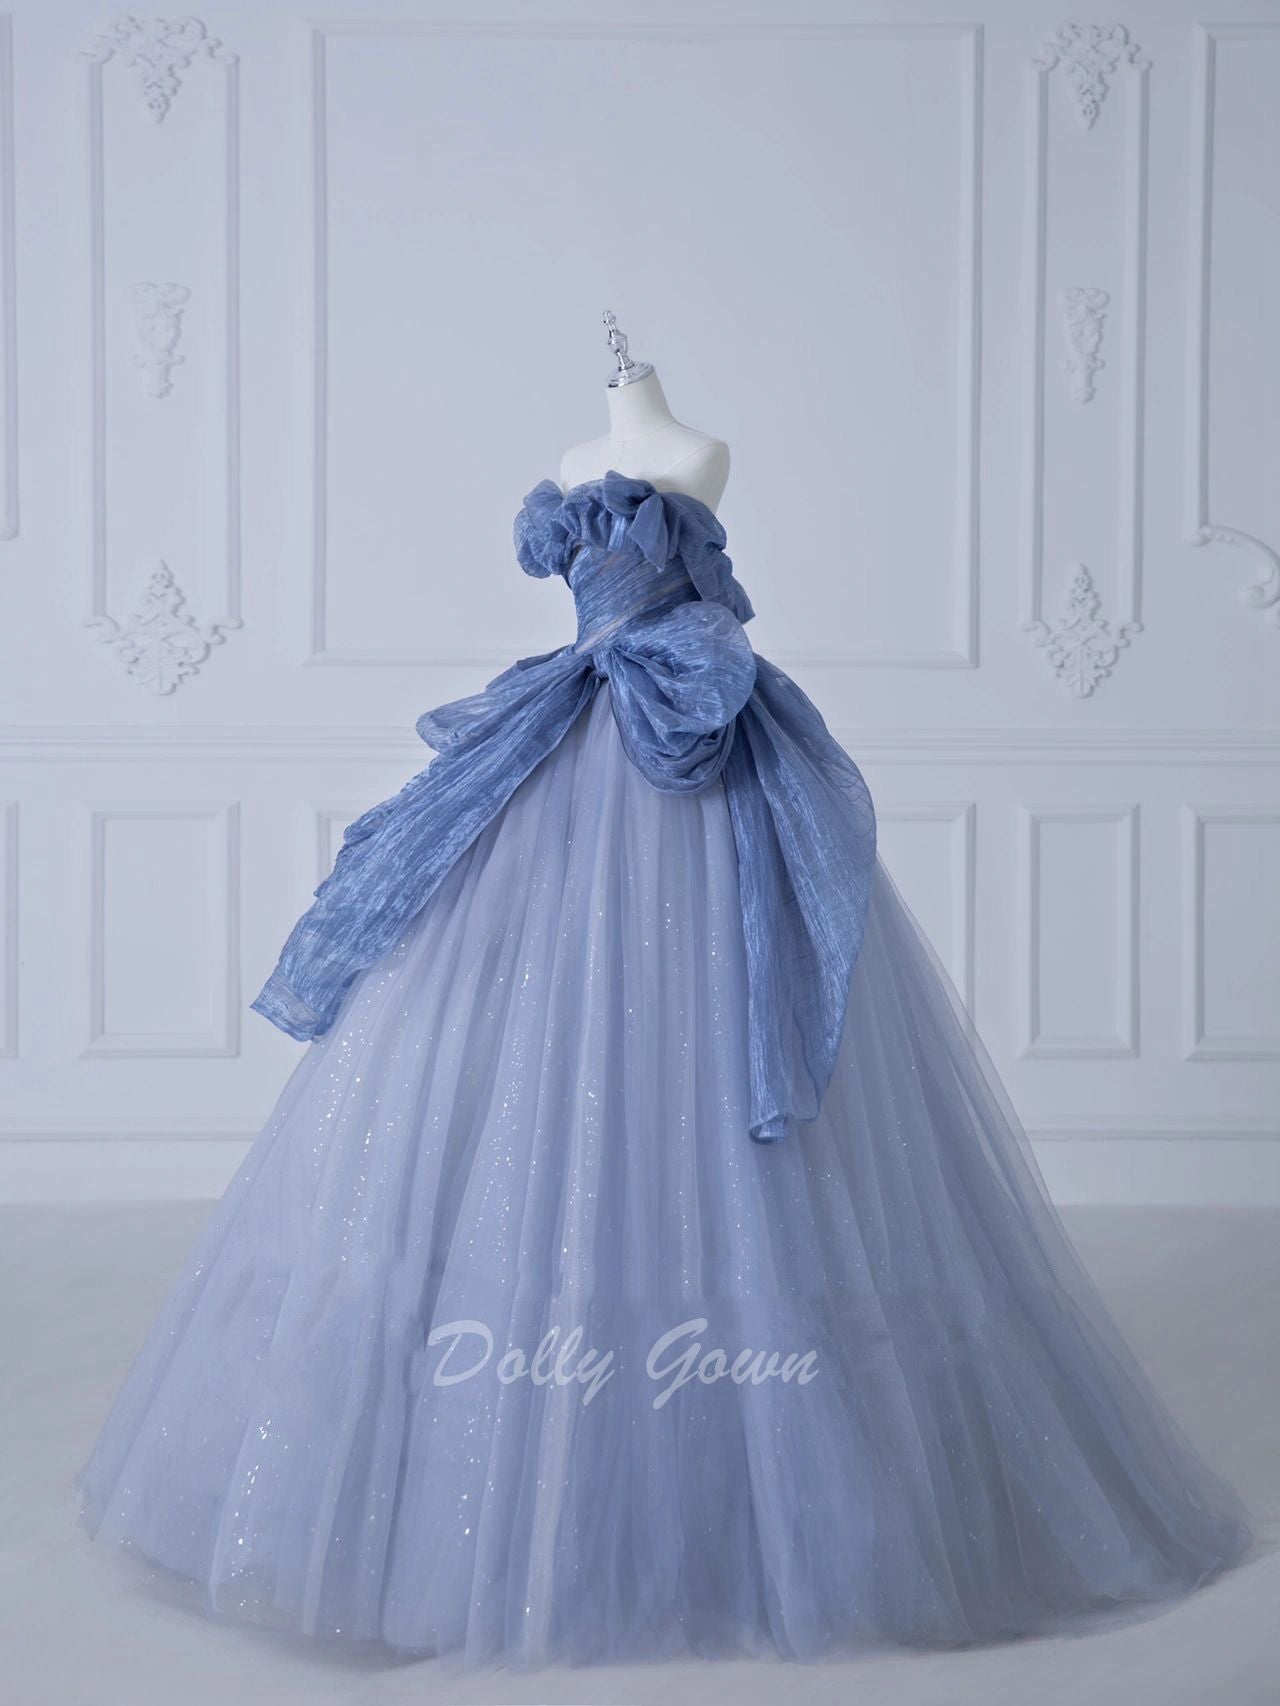 Dusty Blue Ball Gown Prom Dress - DollyGown